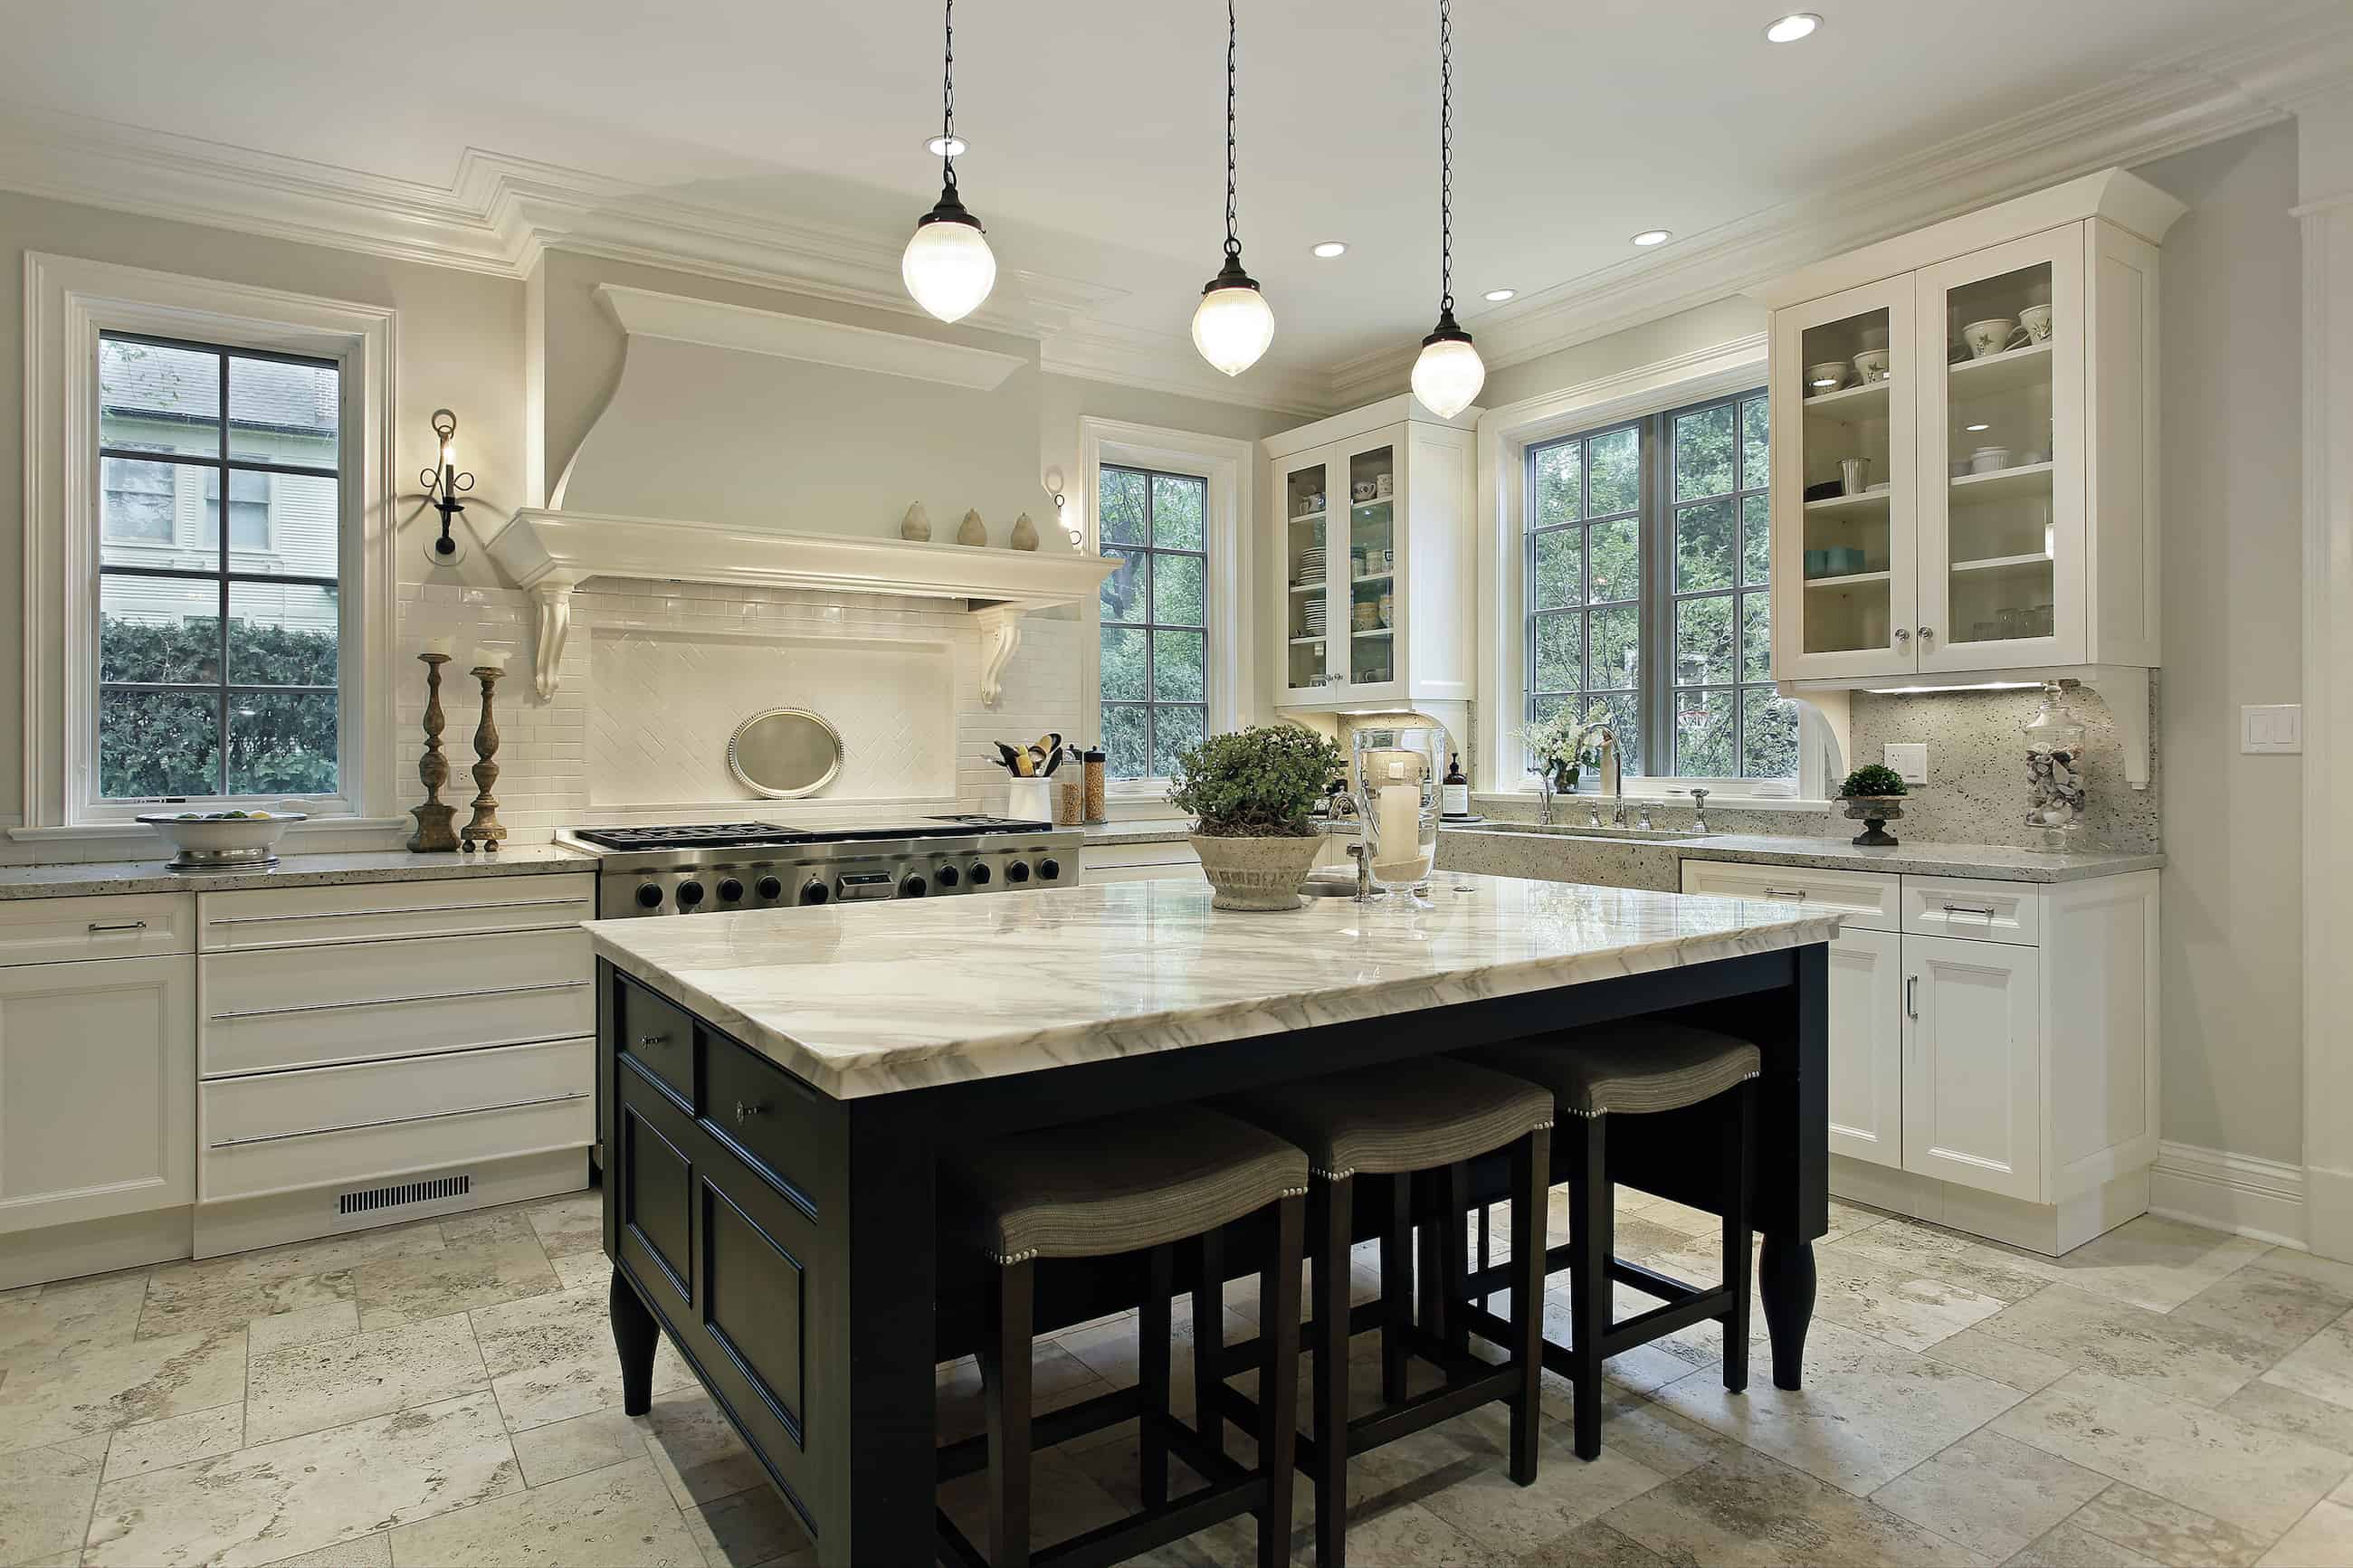 Marble countertop islands are extremely modern to have in the home